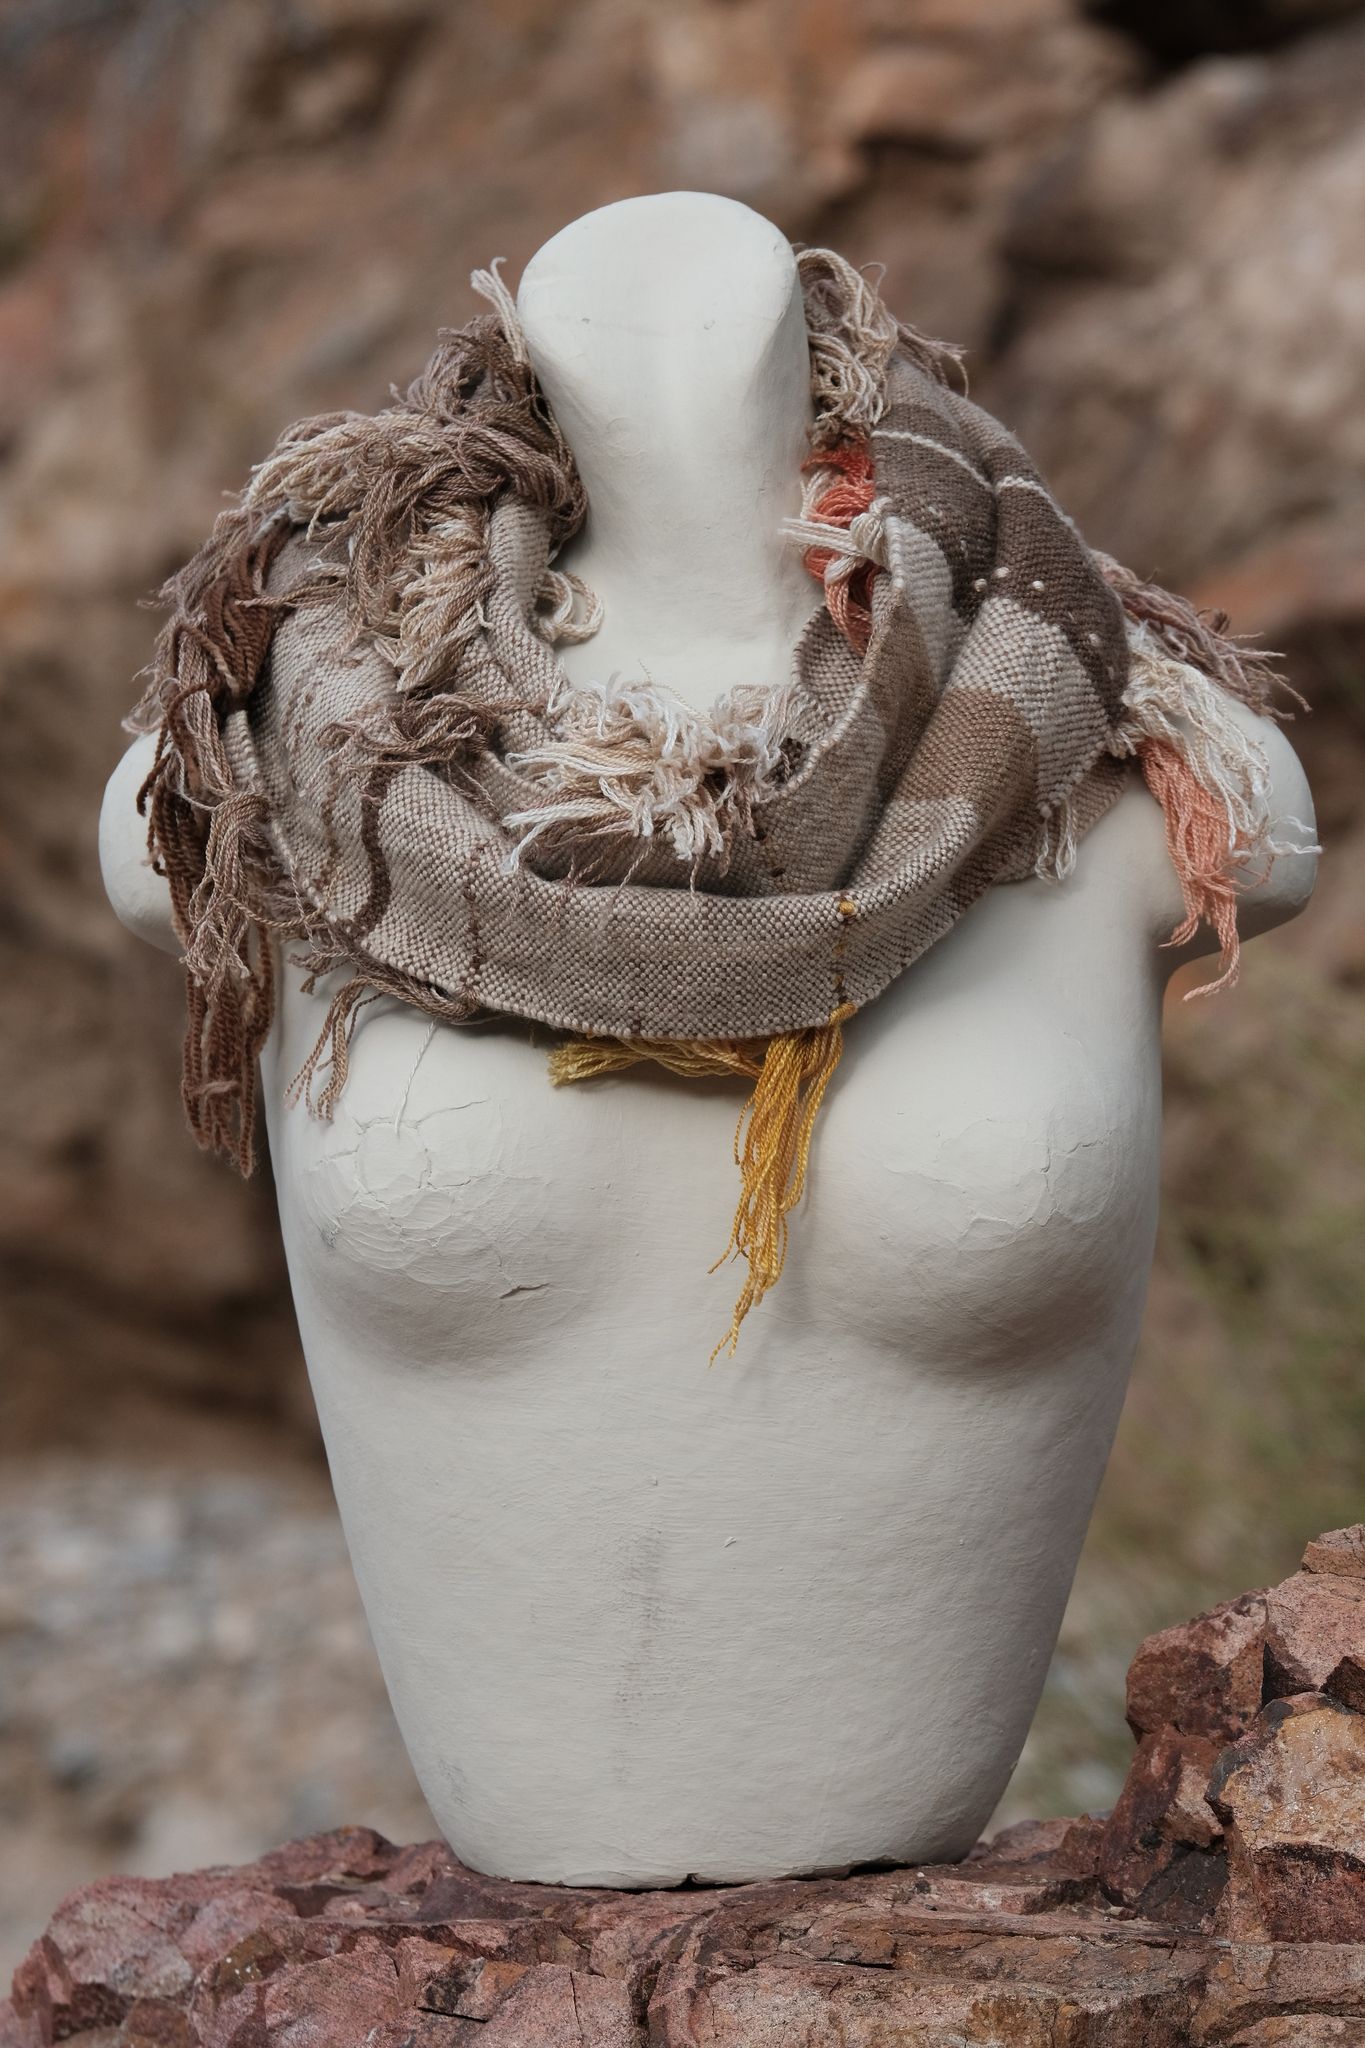 Grey and white handwoven cashmere scarf with naturally dyed salmon, brown and yellow fringe on a white mannequin sitting on a rock in the desert